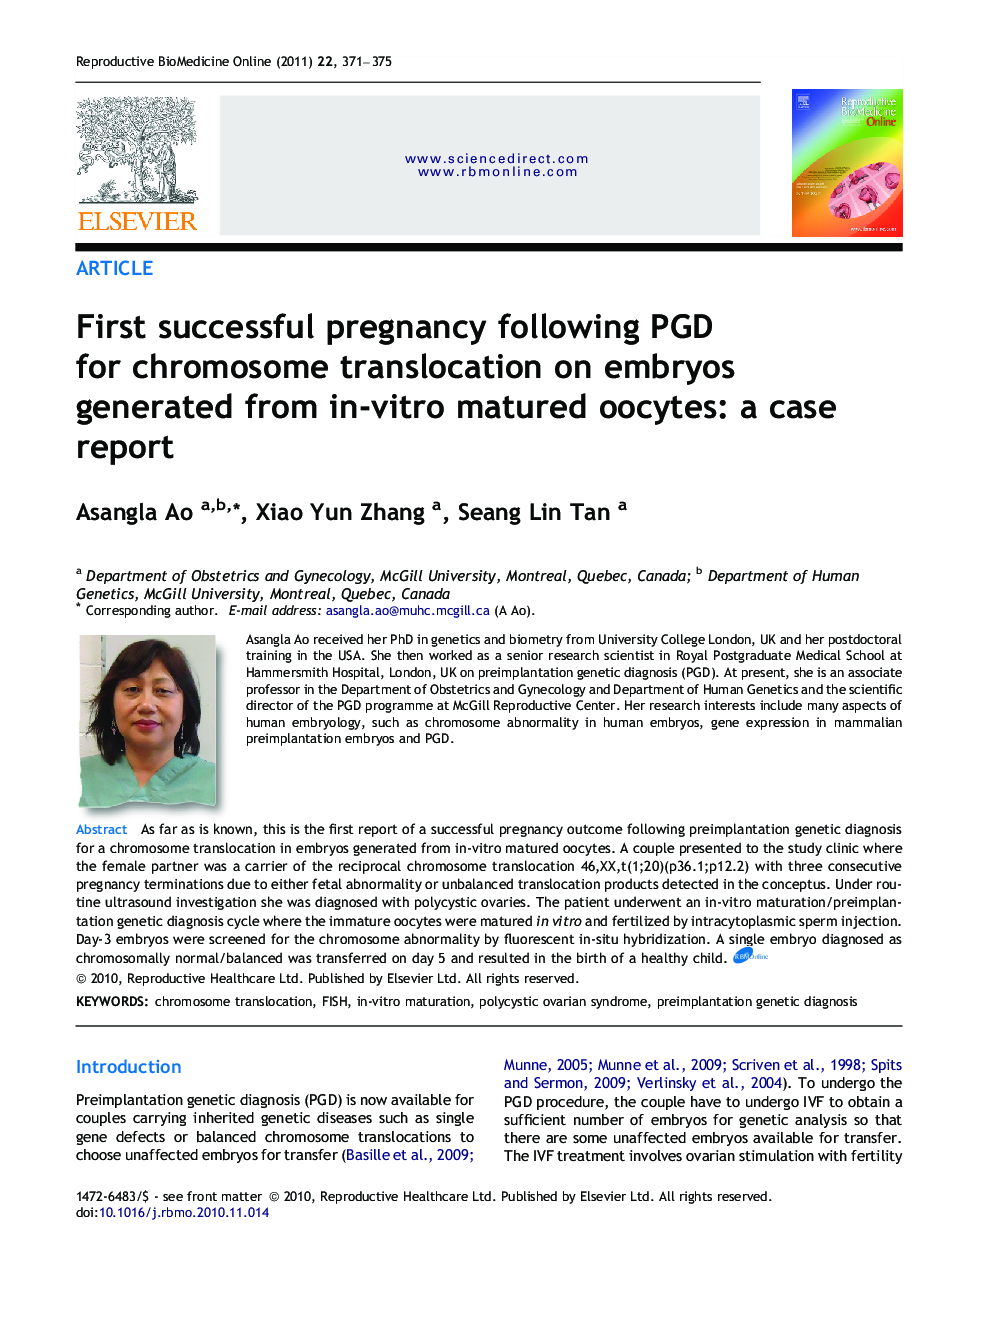 First successful pregnancy following PGD for chromosome translocation on embryos generated from in-vitro matured oocytes: a case report 